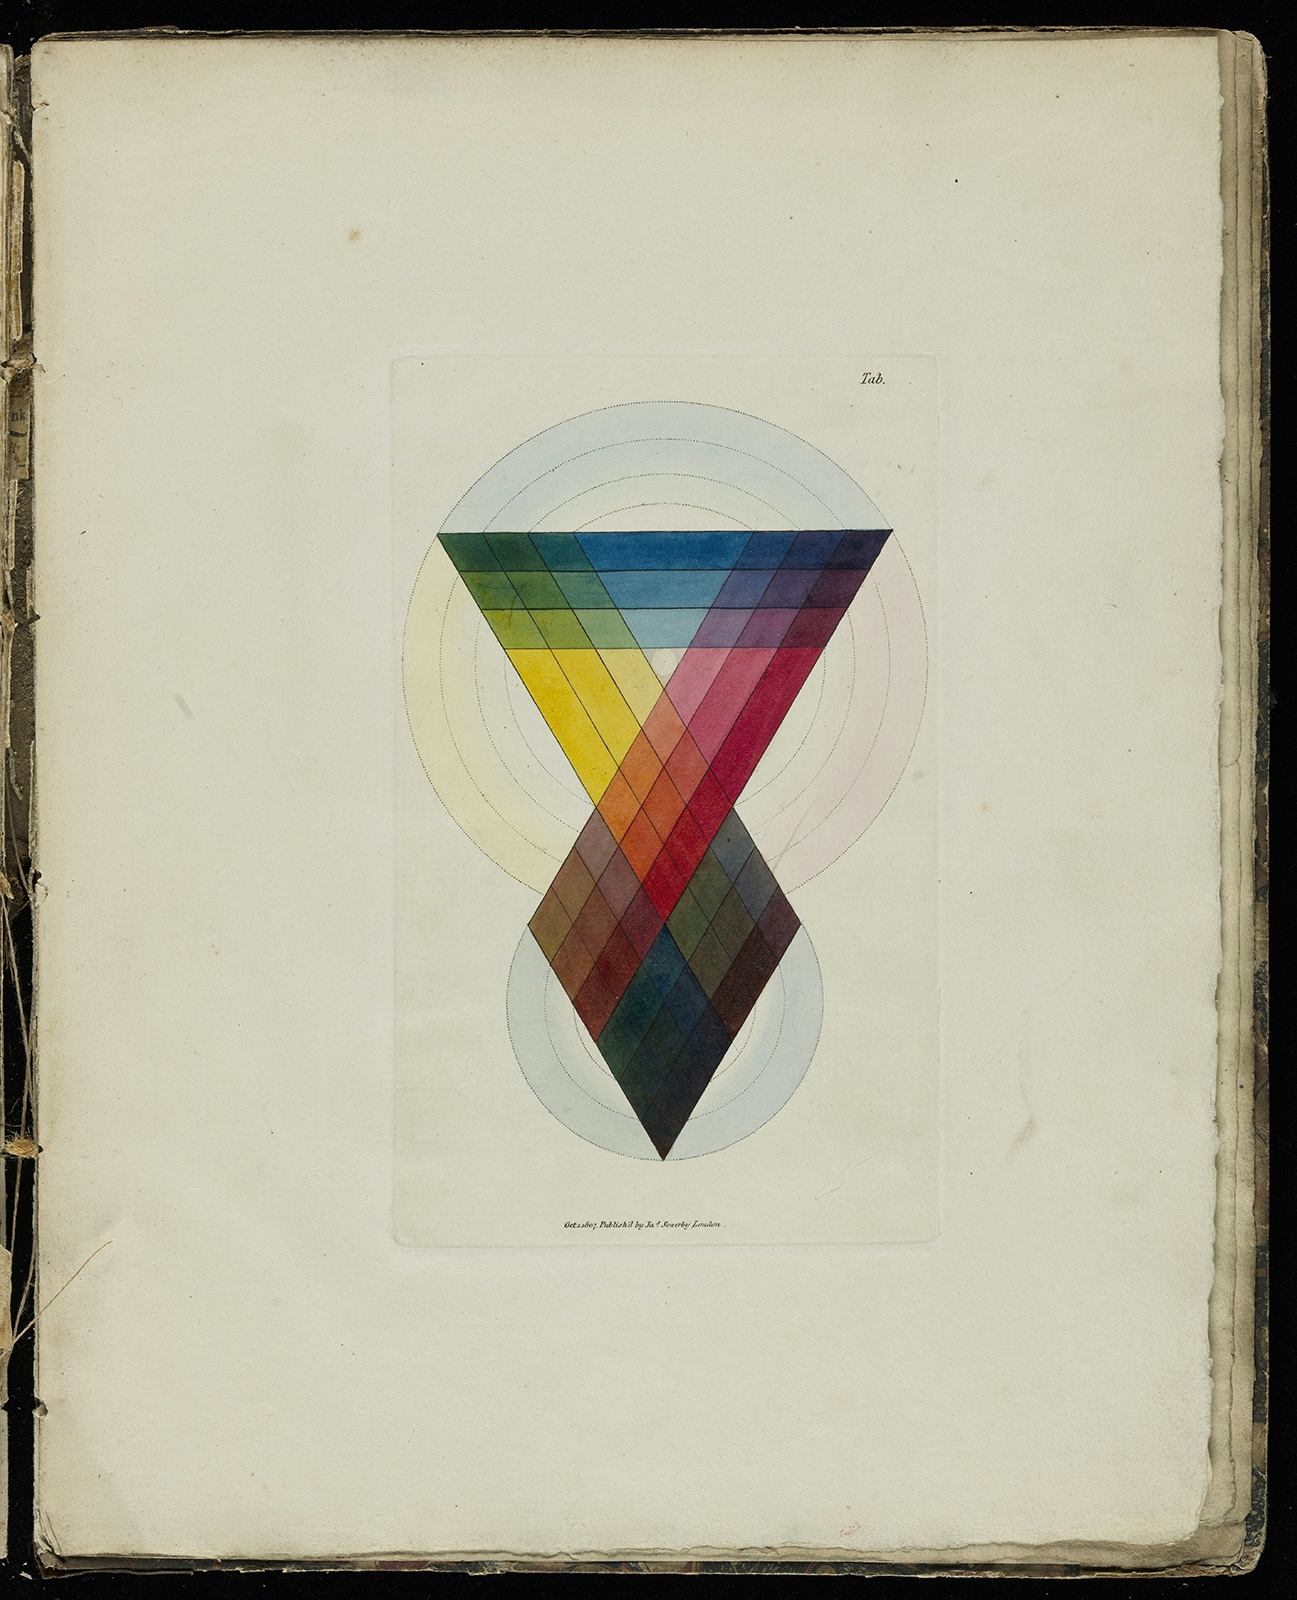 A photograph of a page from a book, with a hand drawn graphic in the centre, showing a many-coloured prism.